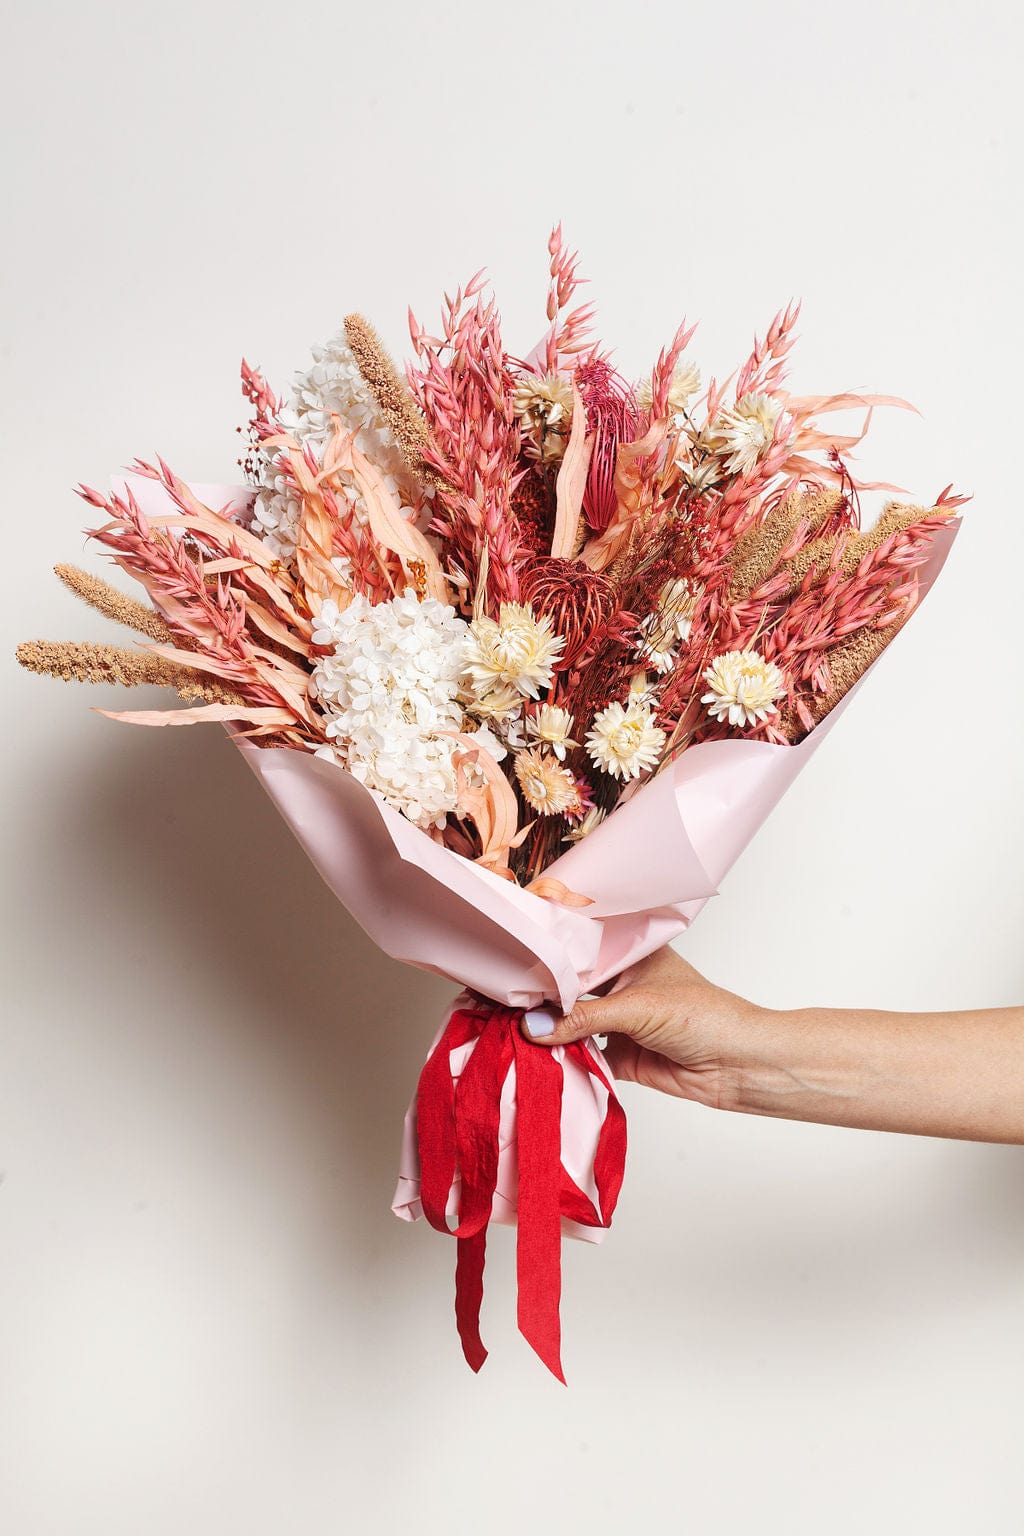 Idlewild Floral Co. Bouquets Deluxe Be My Valentine Bouquet